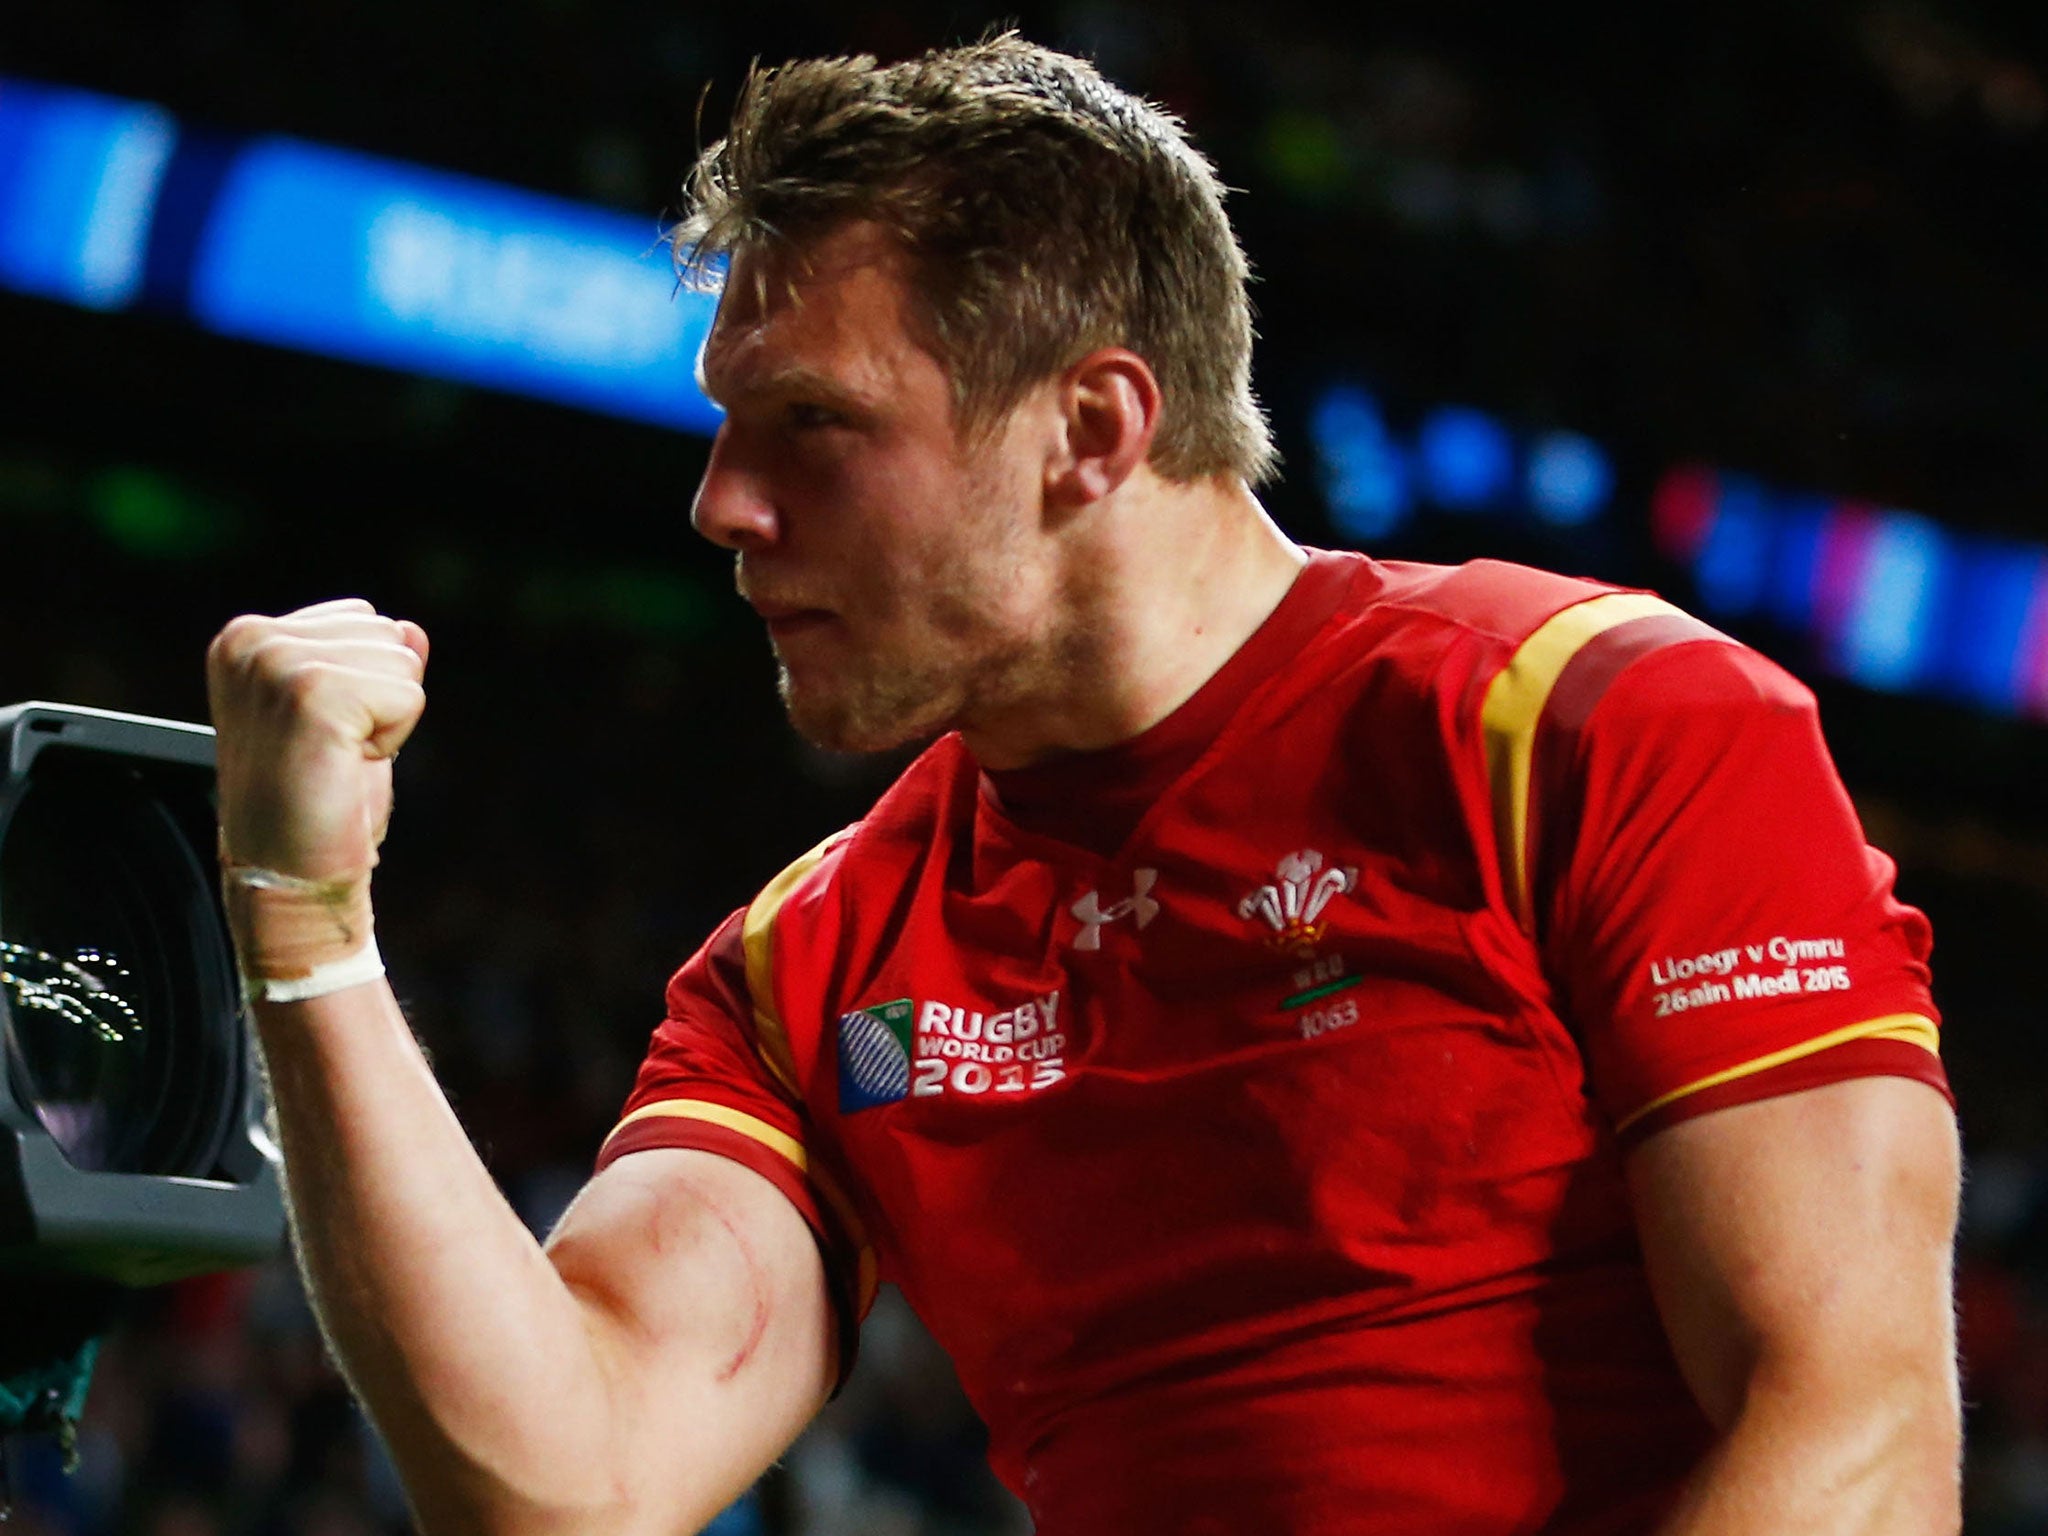 Dan Biggar has grabbed his chance since taking over kicking duties for Wales from the injured Leigh Halfpenny